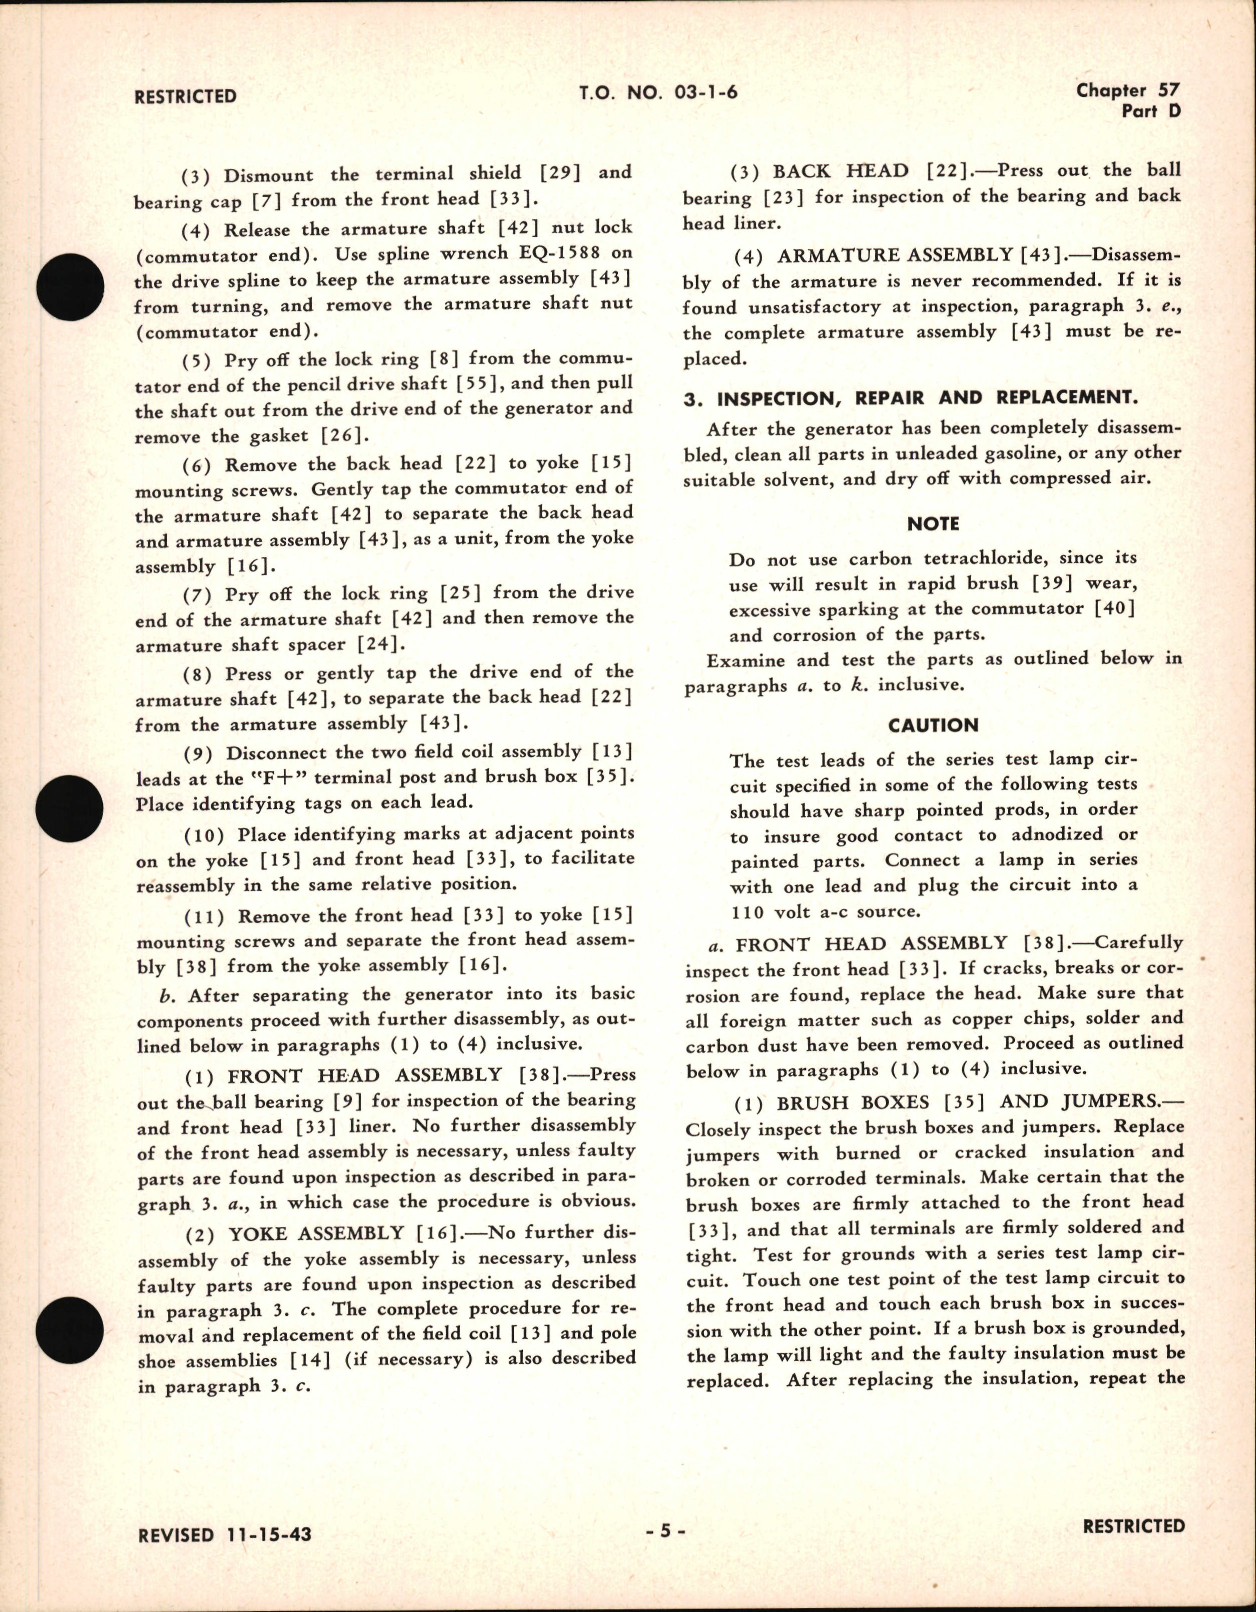 Sample page 5 from AirCorps Library document: Overhaul Instructions for Engine Driven Single Voltage High Field Current D.C. Generator, Ch 57 Part D